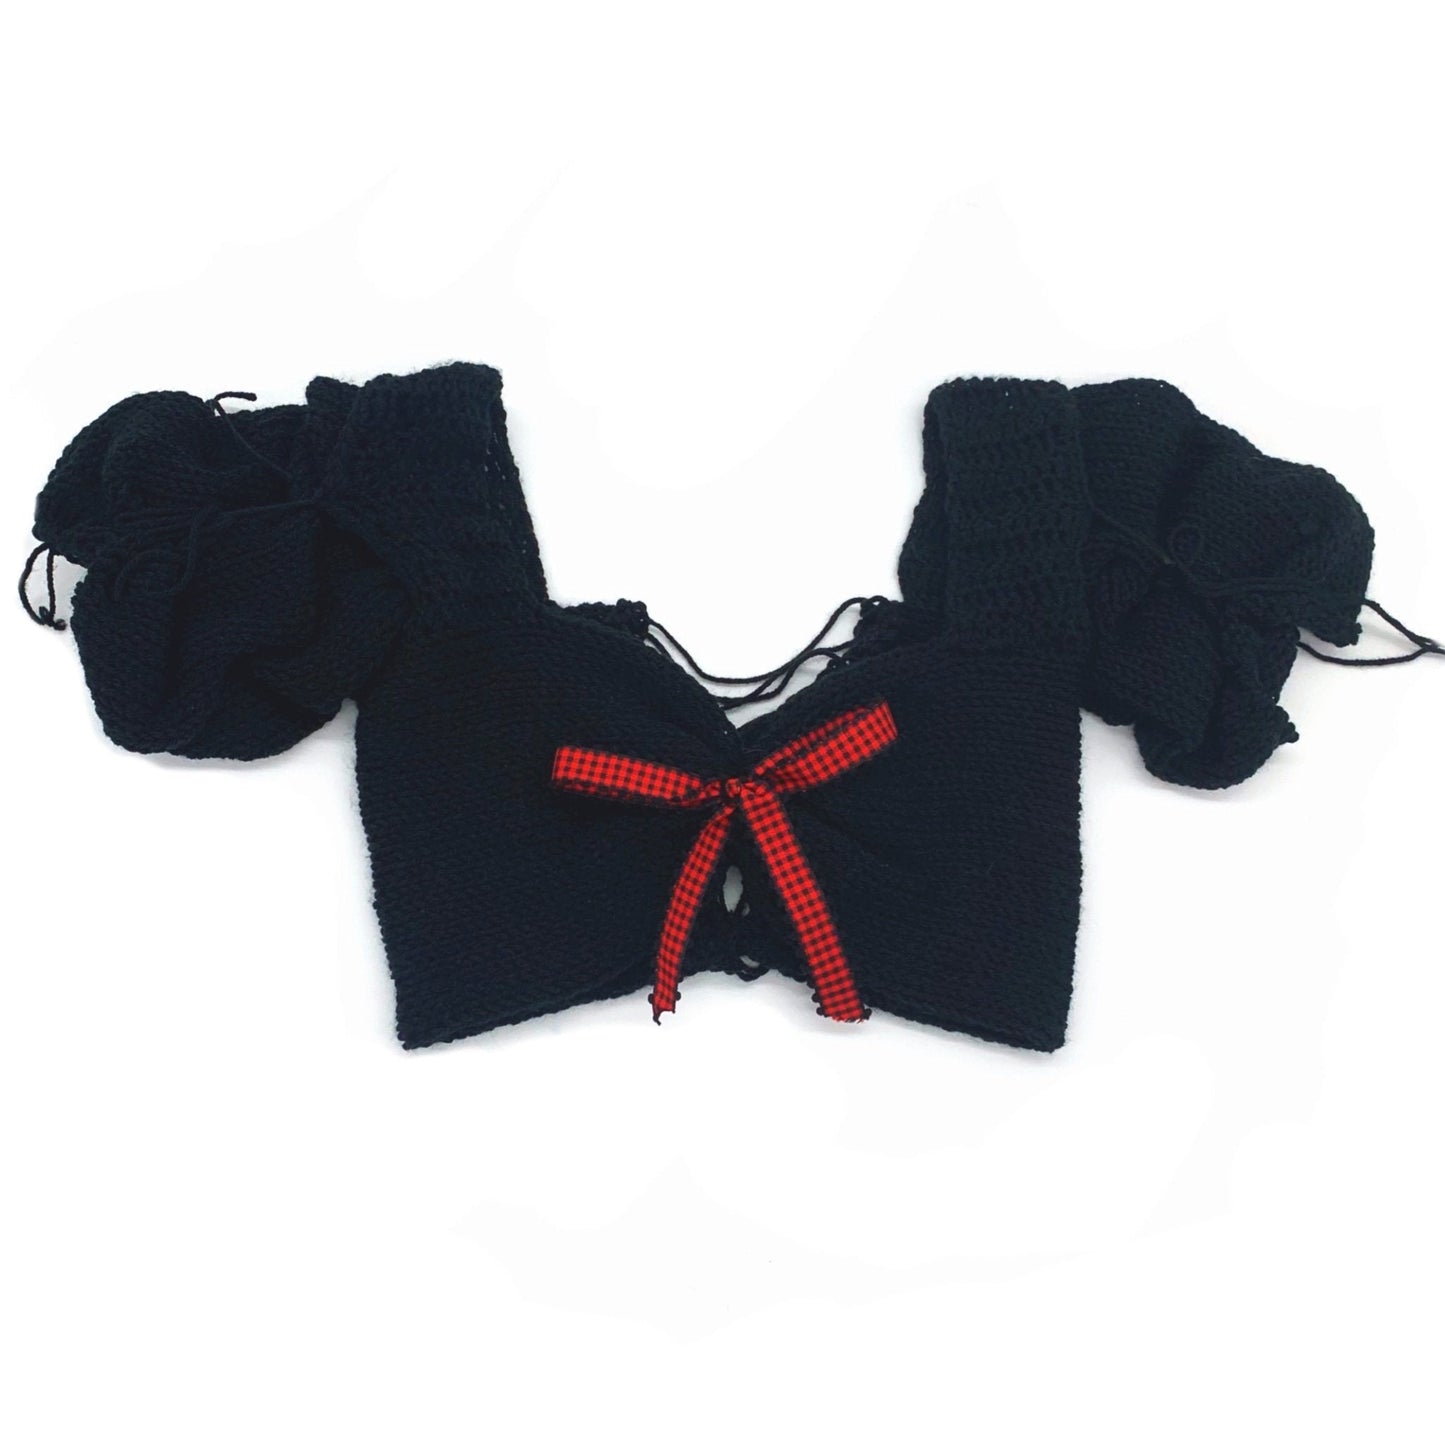 Blue knit crop top with red bow